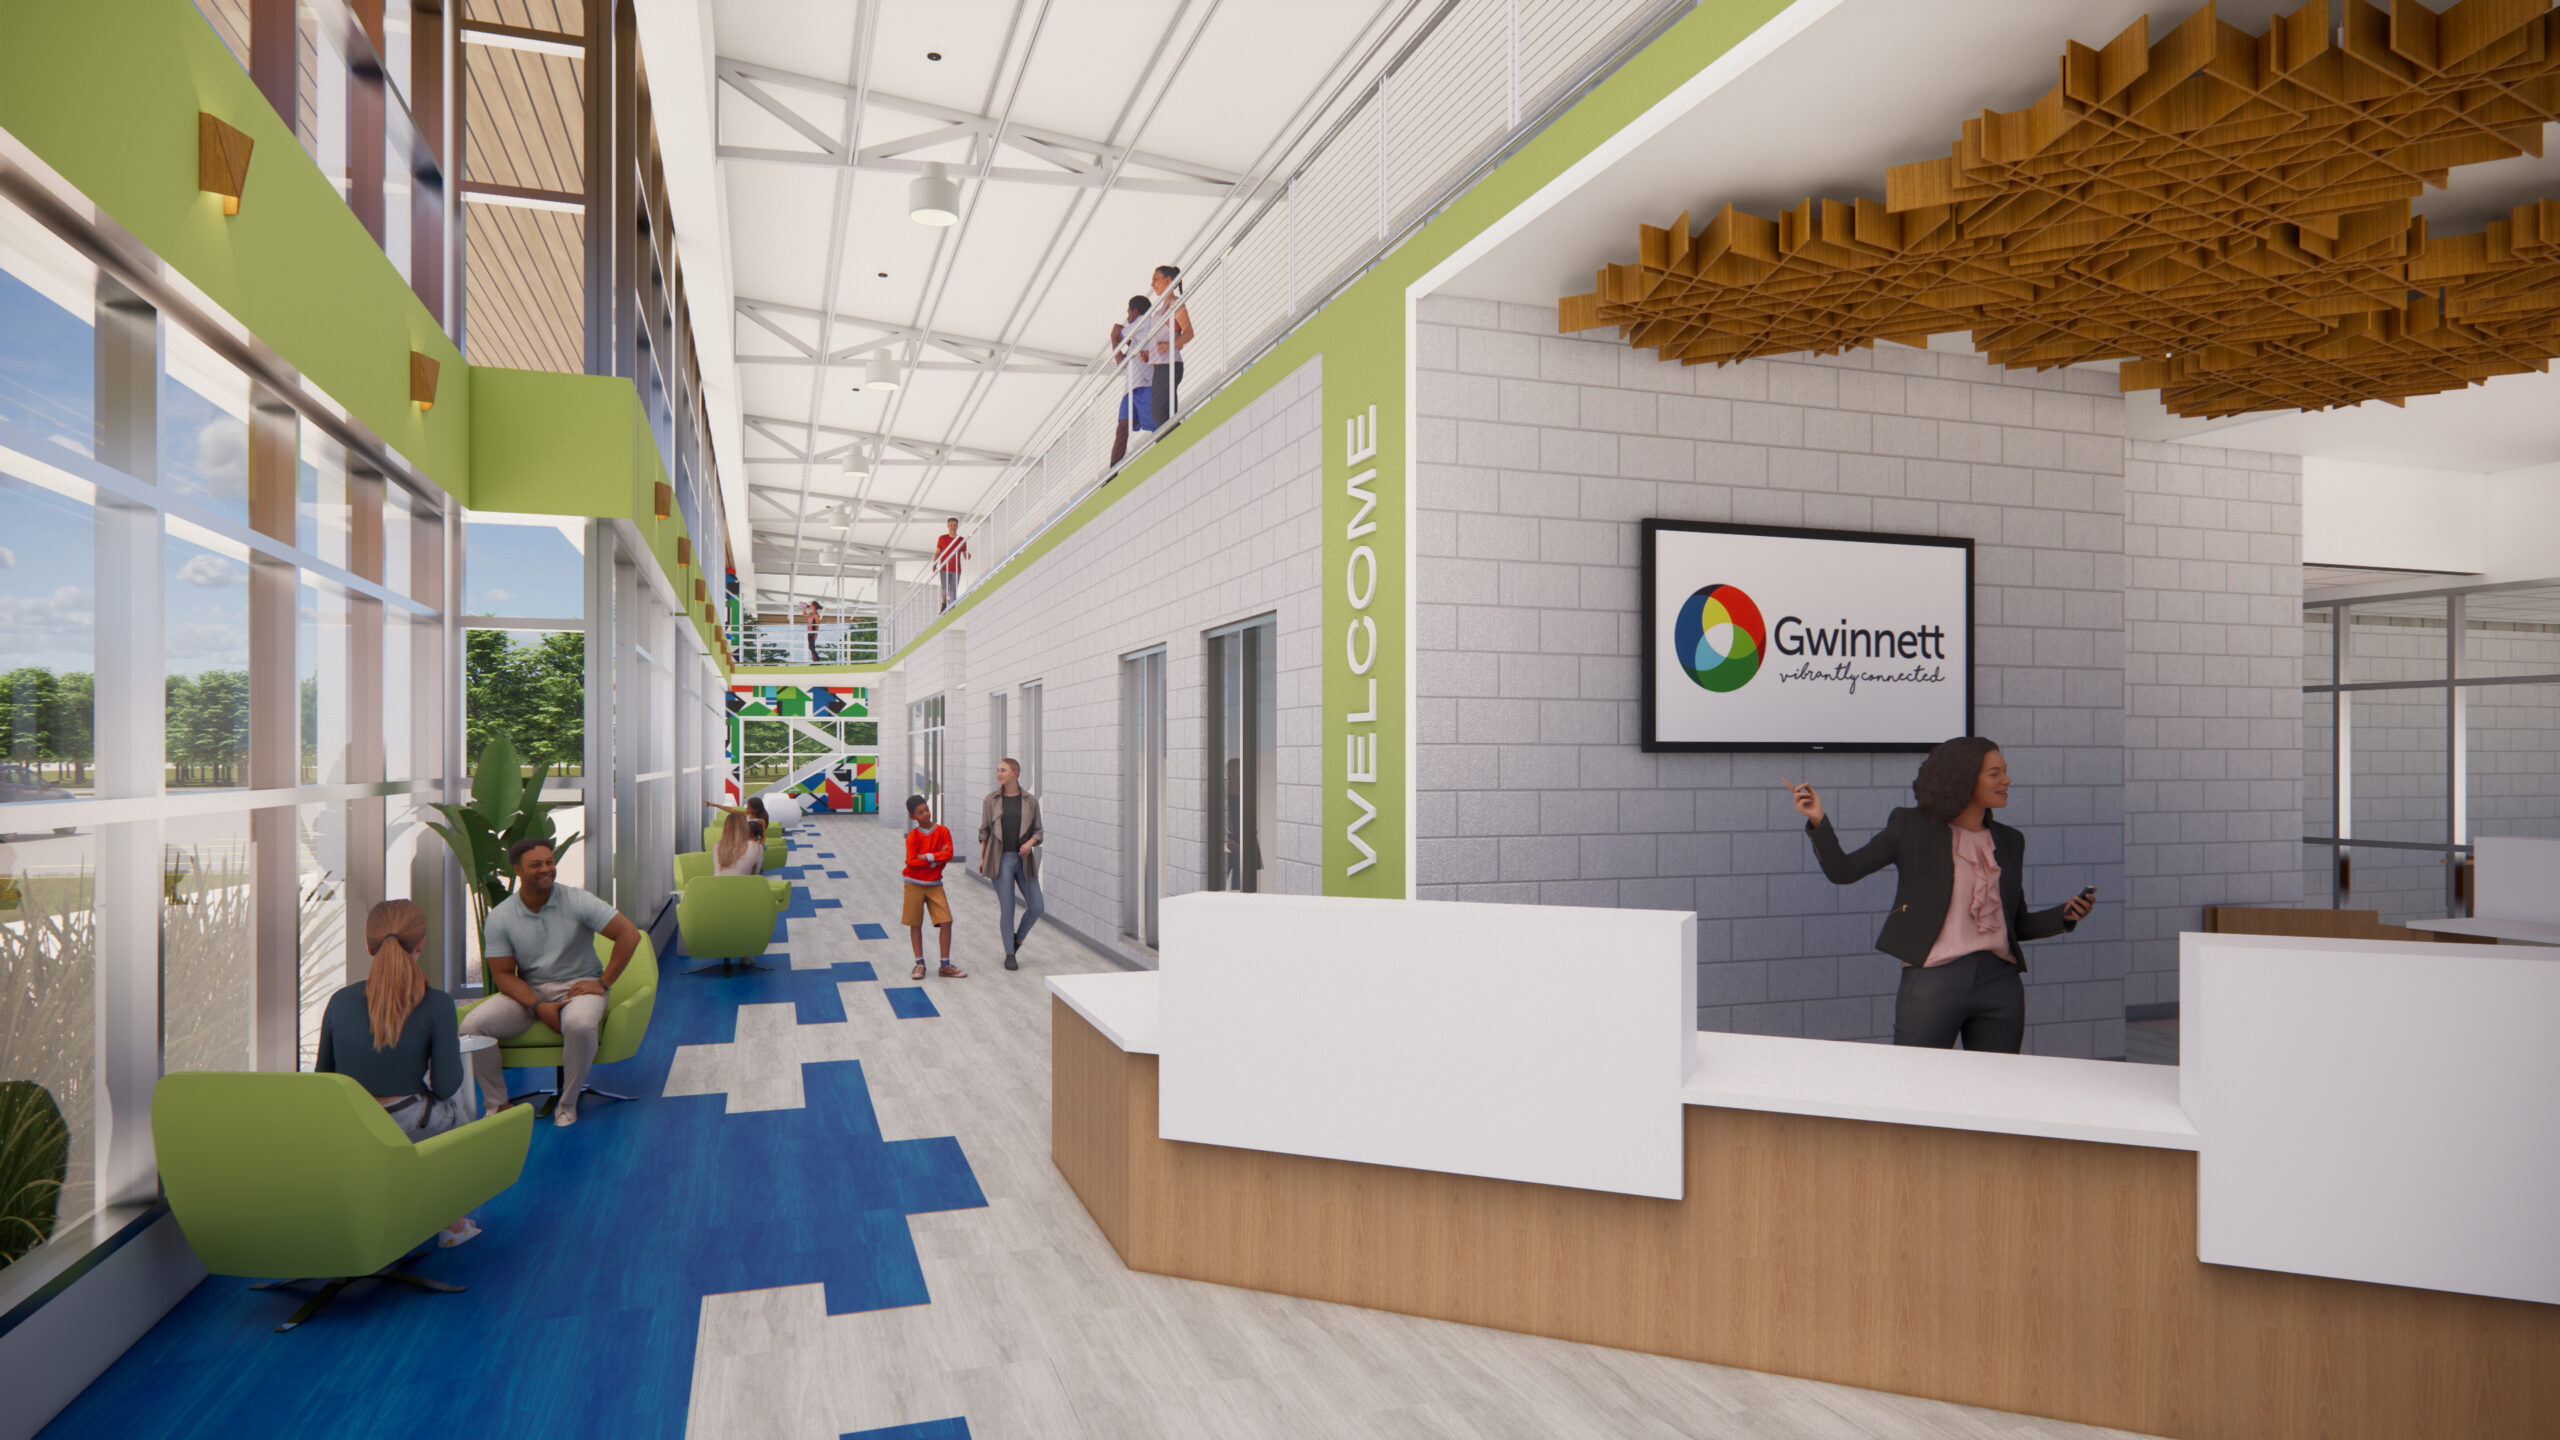 A 3D rendering of a recreation center lobby, with a woman standing at a front welcome desk.